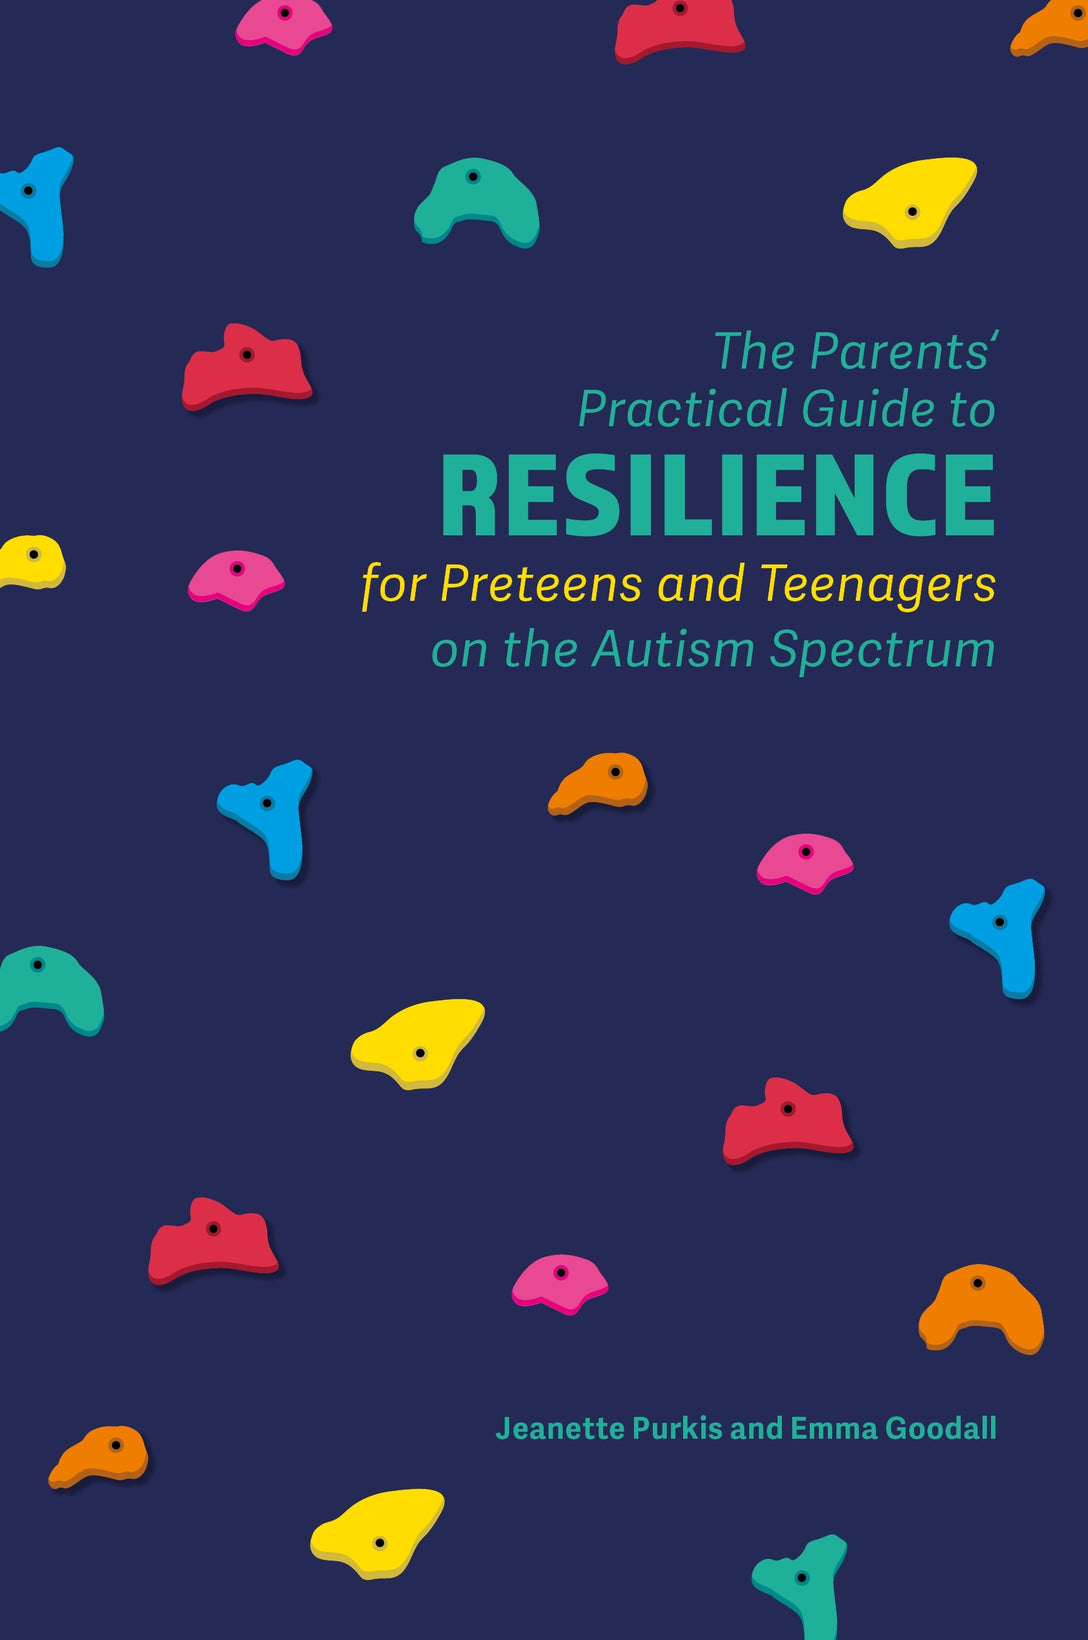 The Parents' Practical Guide to Resilience for Preteens and Teenagers on the Autism Spectrum by Yenn Purkis, Emma Goodall